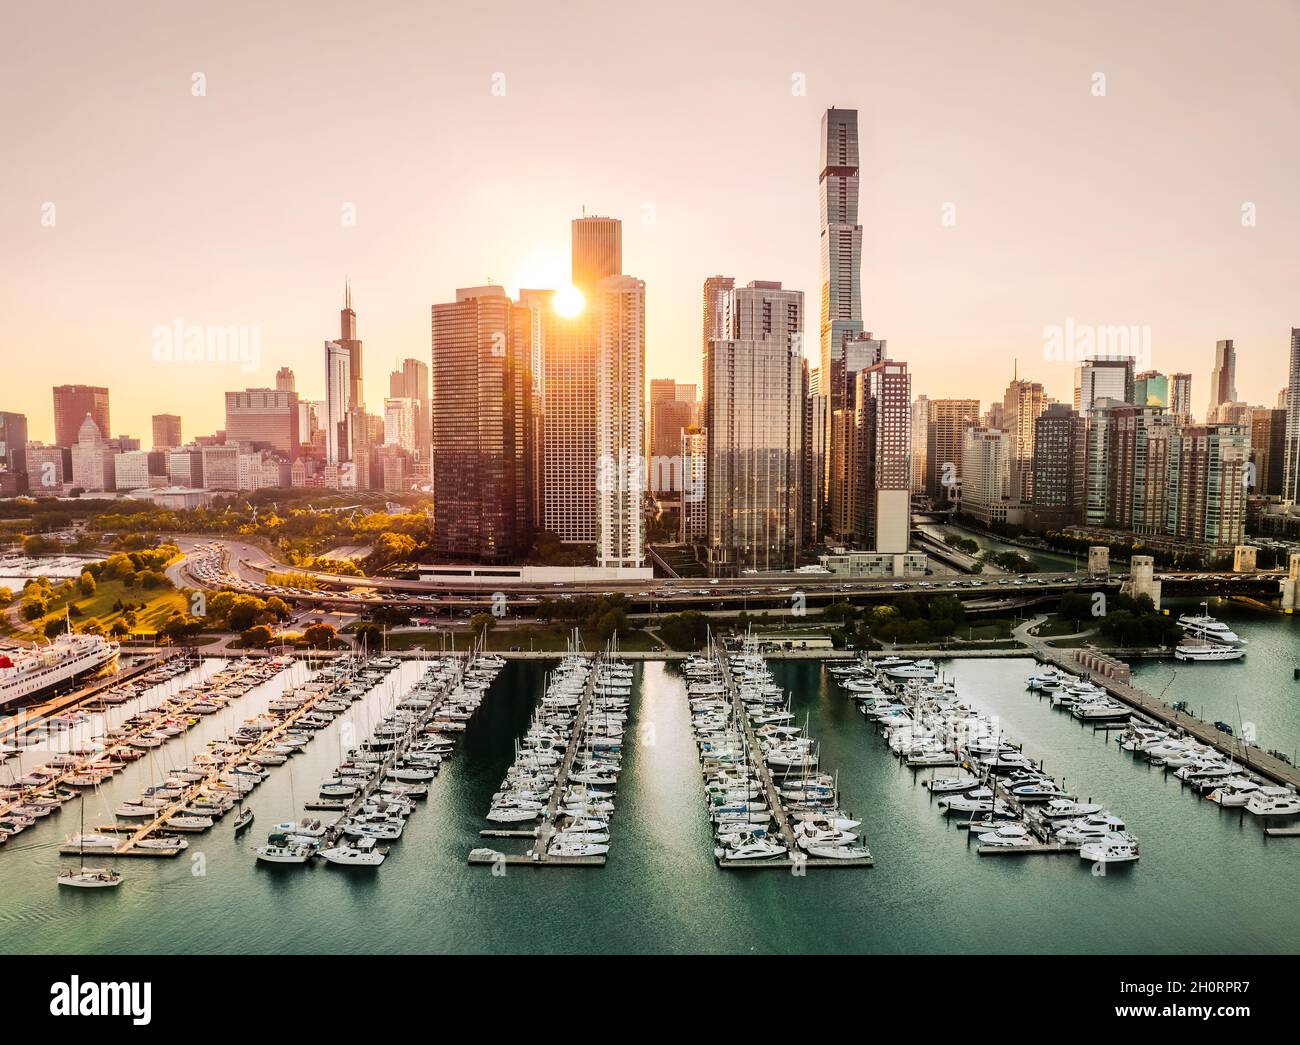 Aerial view of city skyline and boats in marina at sunset, Chicago, Illinois, USA Stock Photo